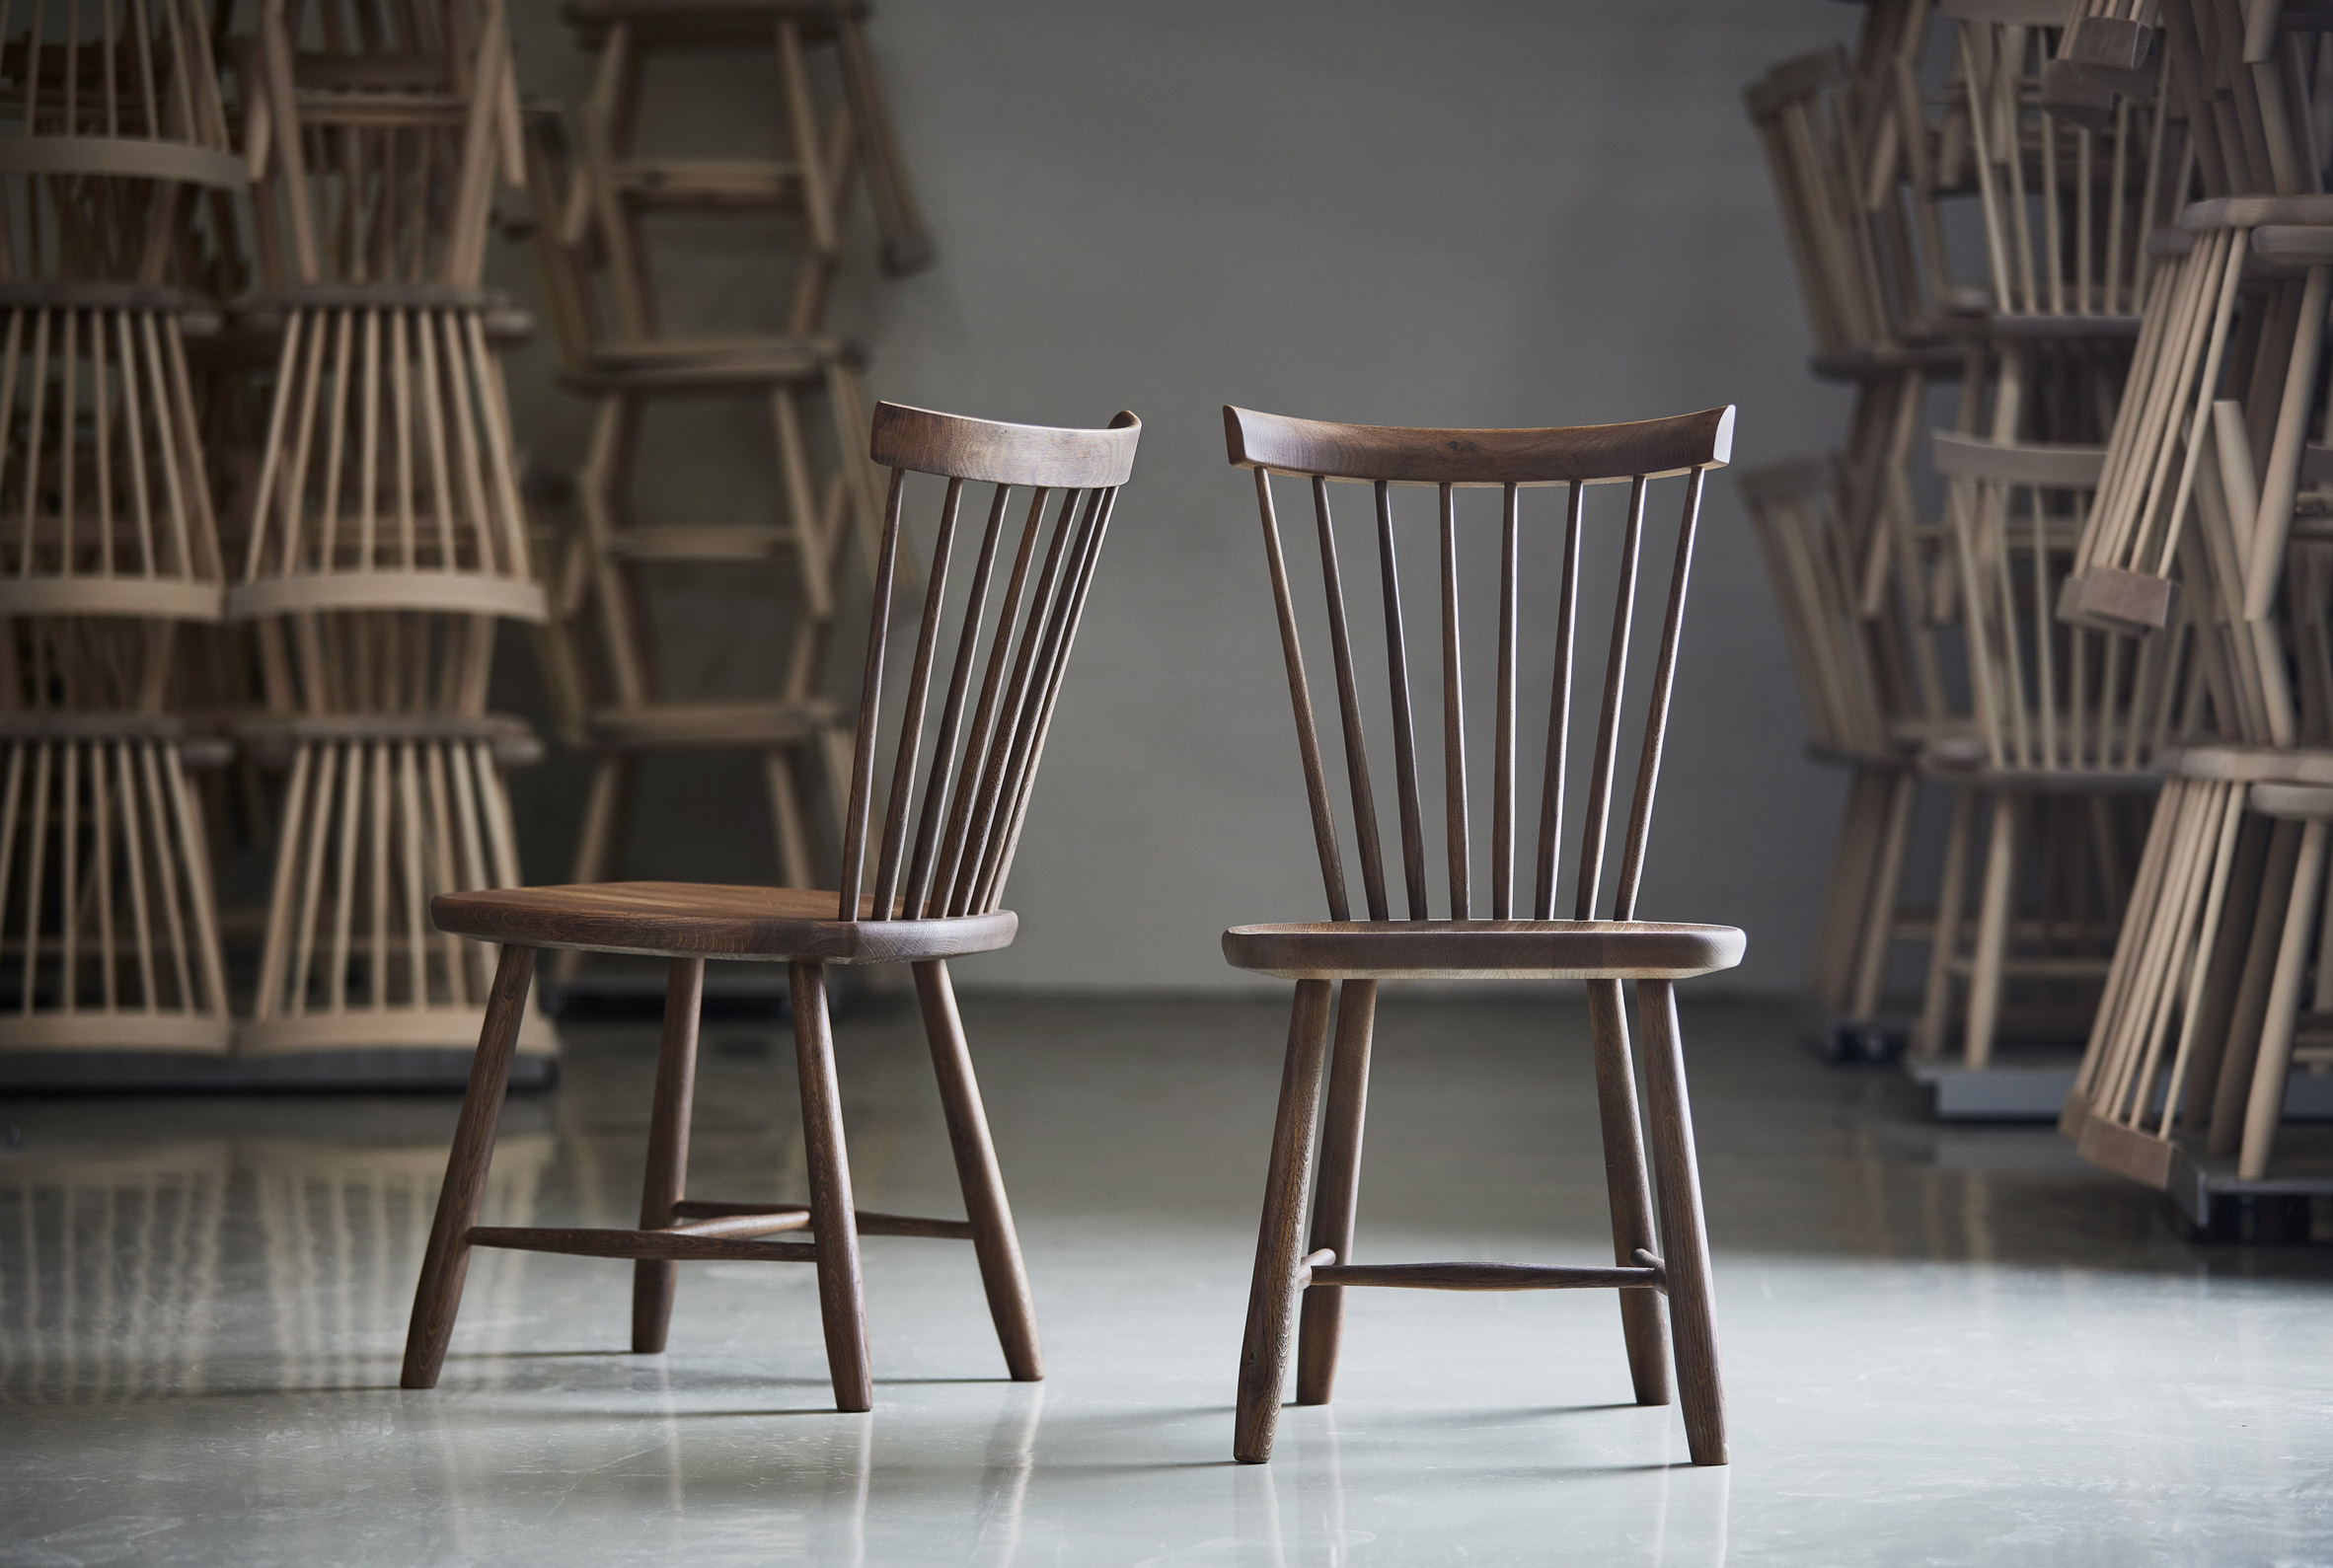 Lilla Aland chair by Stolab